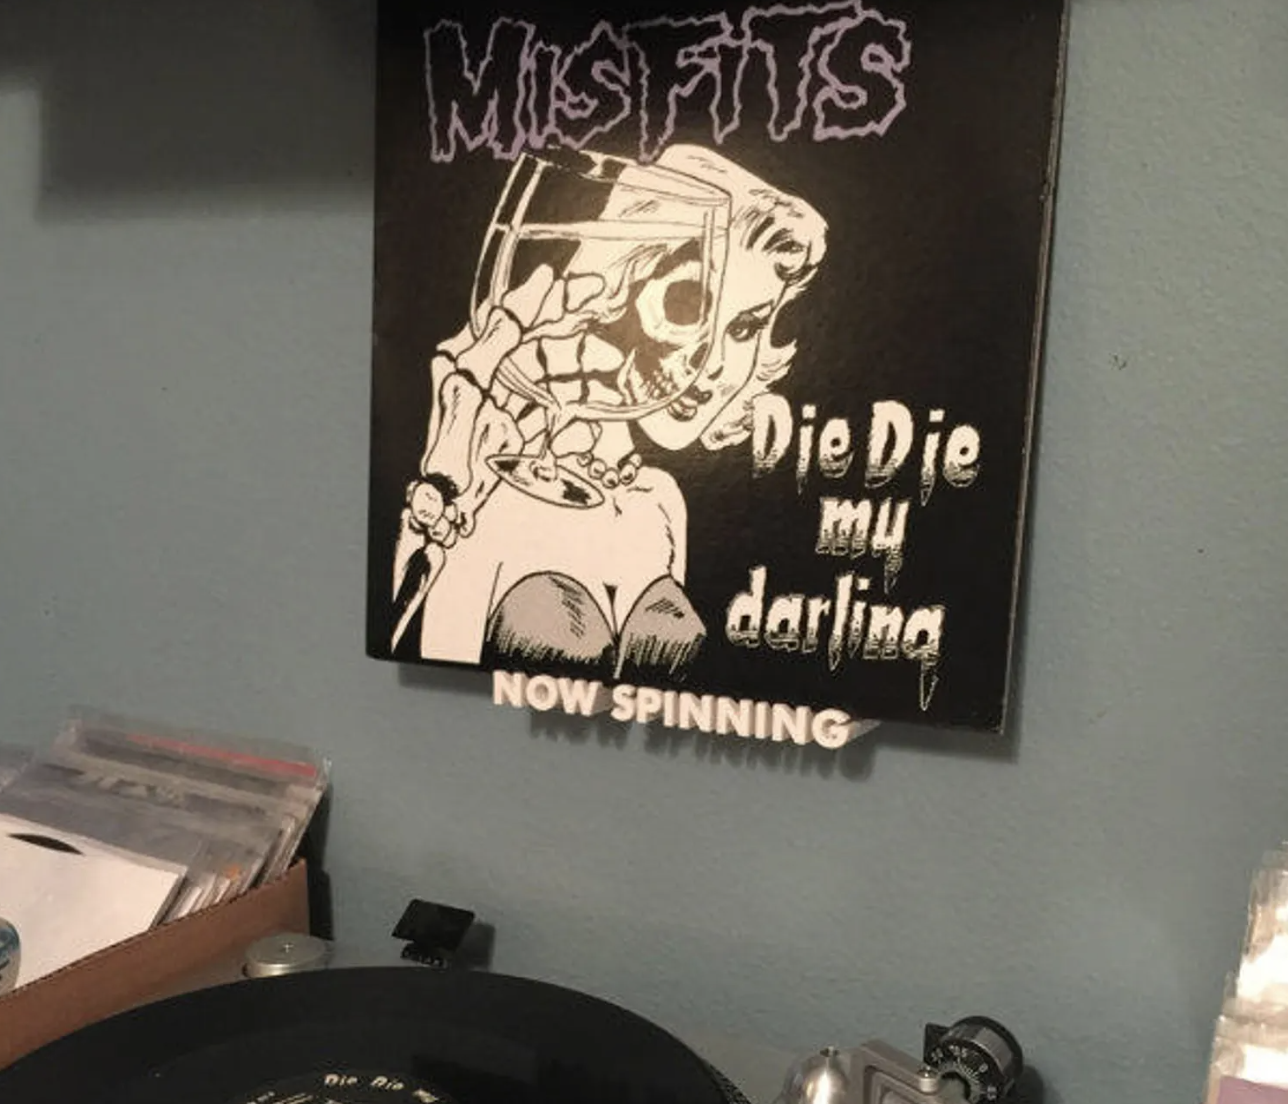 the vinyl shelf with white lettering that reads now spinning and holding a vinyl